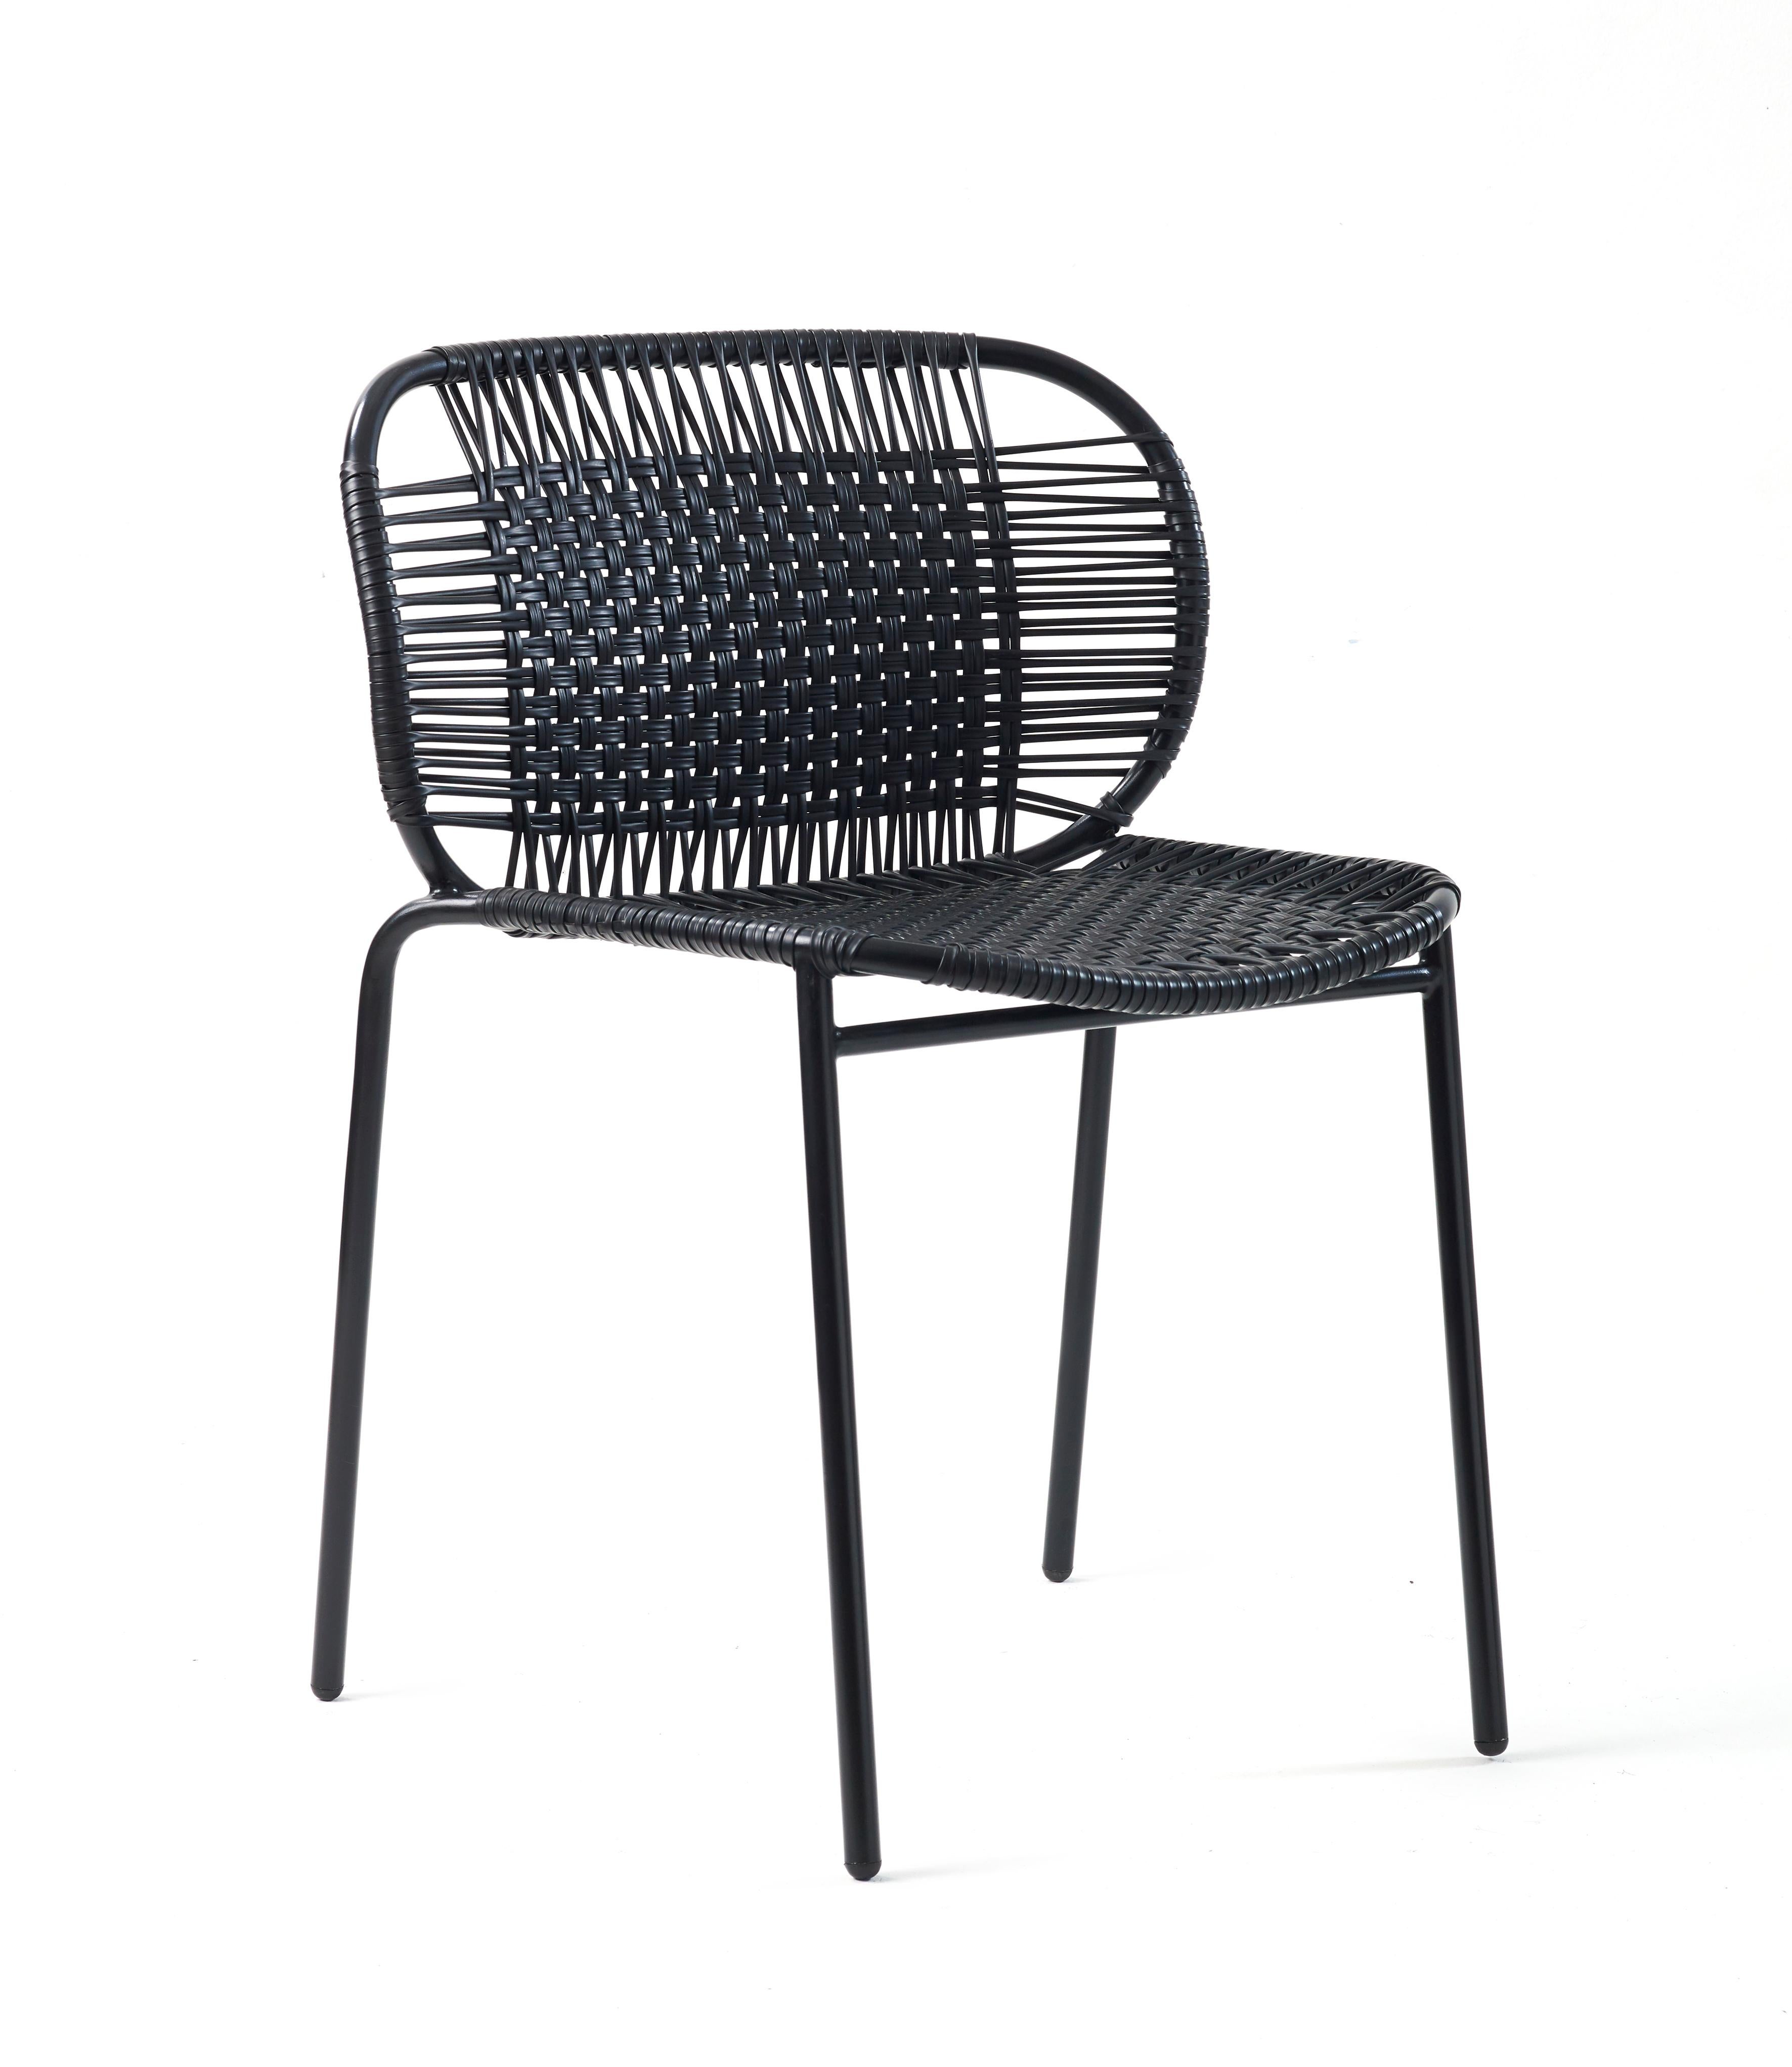 Set of 4 Black Cielo stacking chair by Sebastian Herkner
Materials: PVC strings, powder-coated steel frame. 
Technique: Made from recycled plastic and weaved by local craftspeople in Cartagena, Colombia. 
Dimensions: W 56 x D 51.4 x H 78 cm